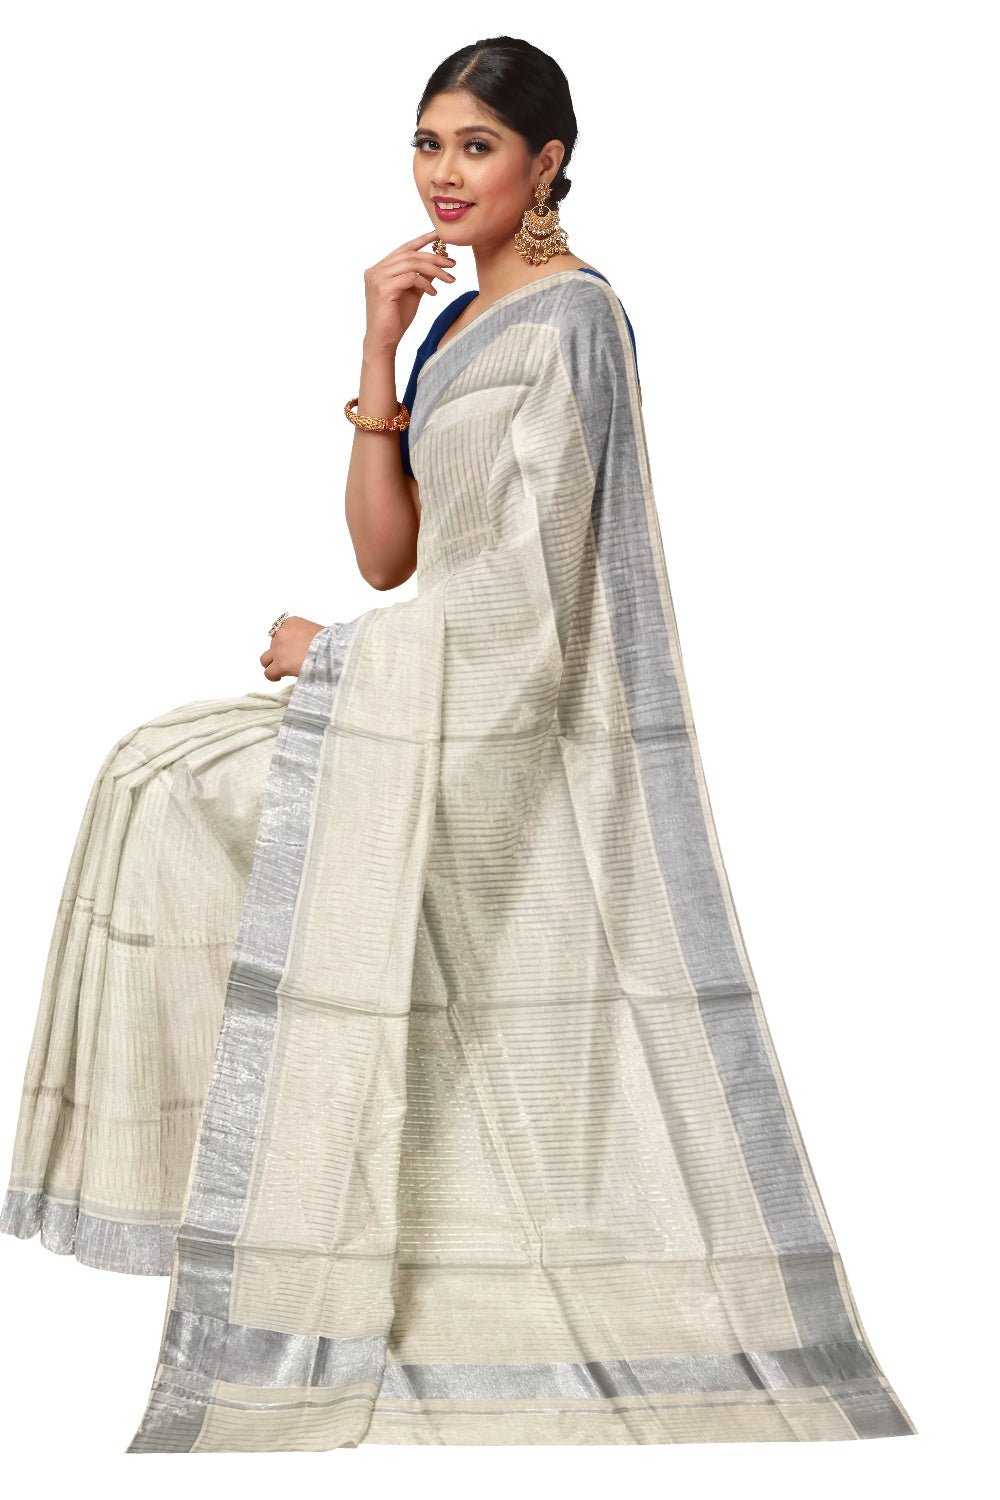 Pure Cotton Kerala Saree with Silver Lines Design on Body and Silver Border